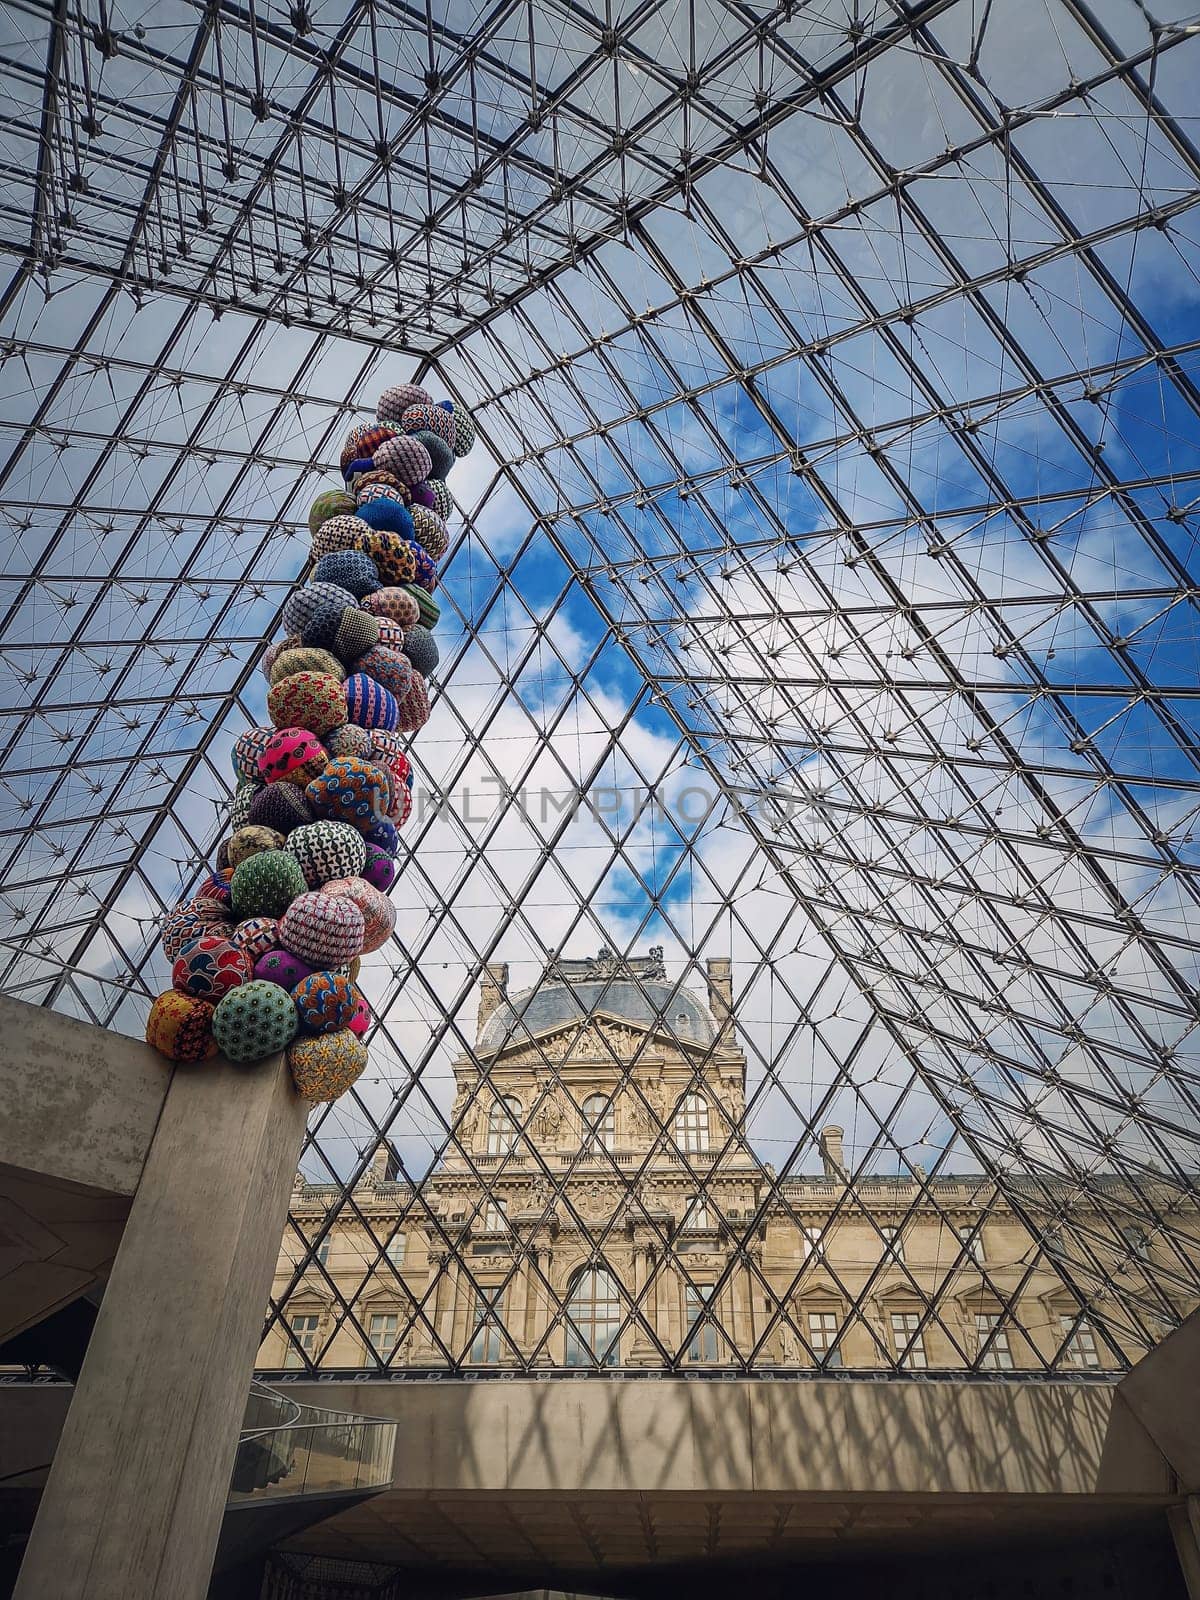 Underneath the Louvre glass pyramid, vertical background. Beautiful architecture details with an abstract mixture of classical and modern styles by psychoshadow